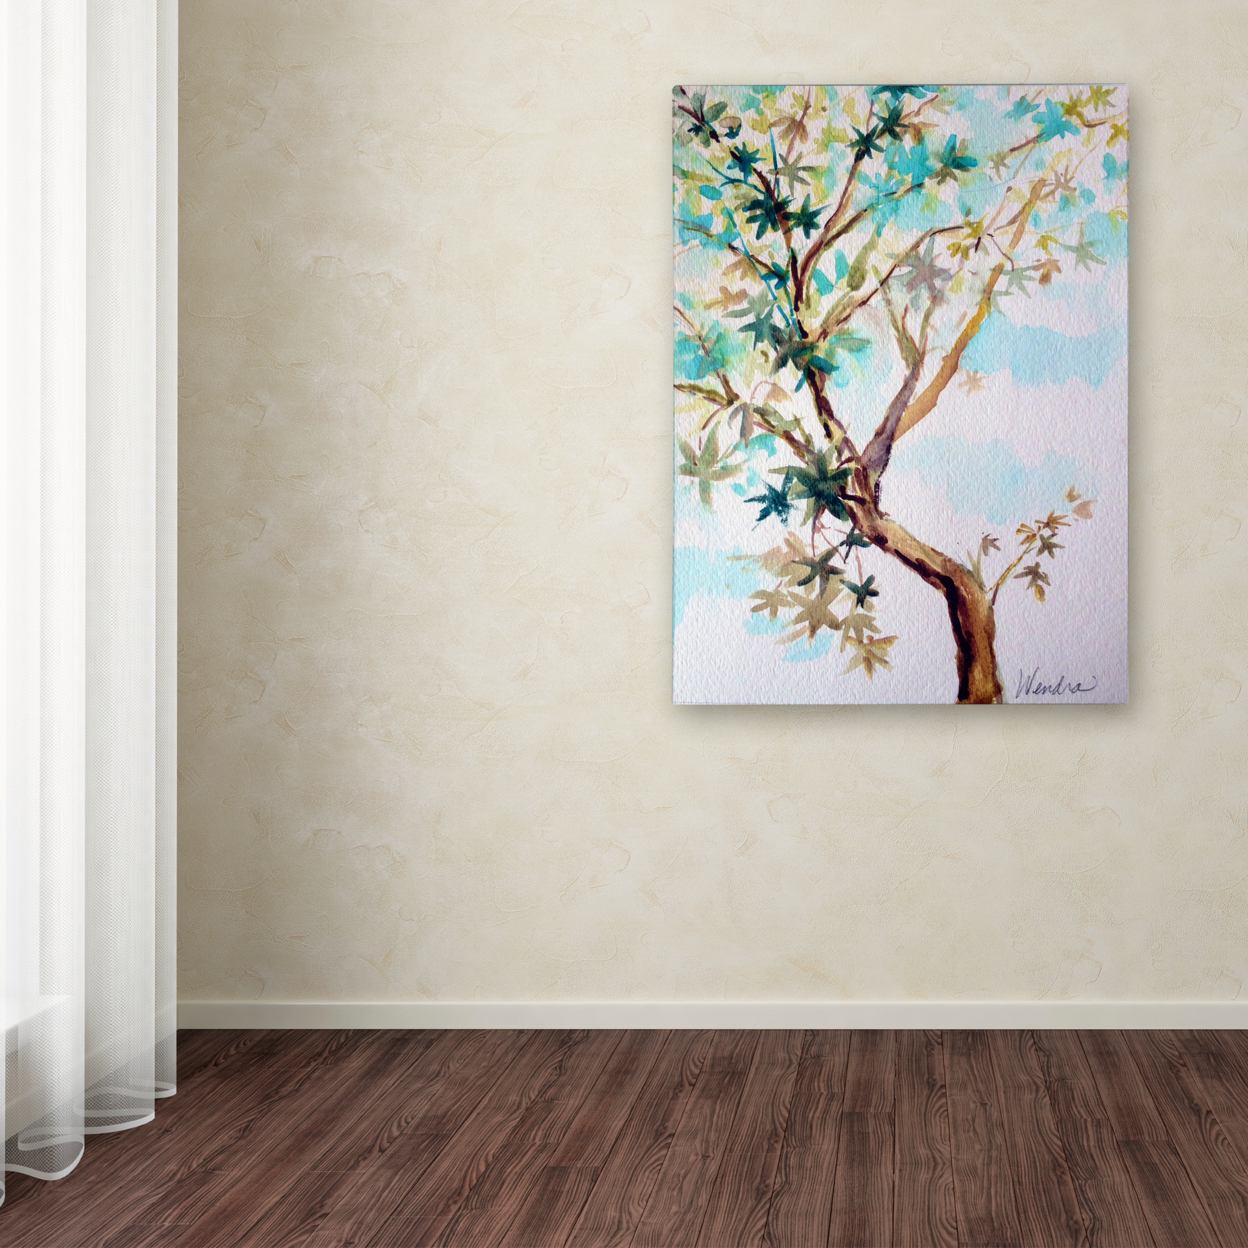 Wendra 'Blue Maple' Canvas Wall Art 35 X 47 Inches